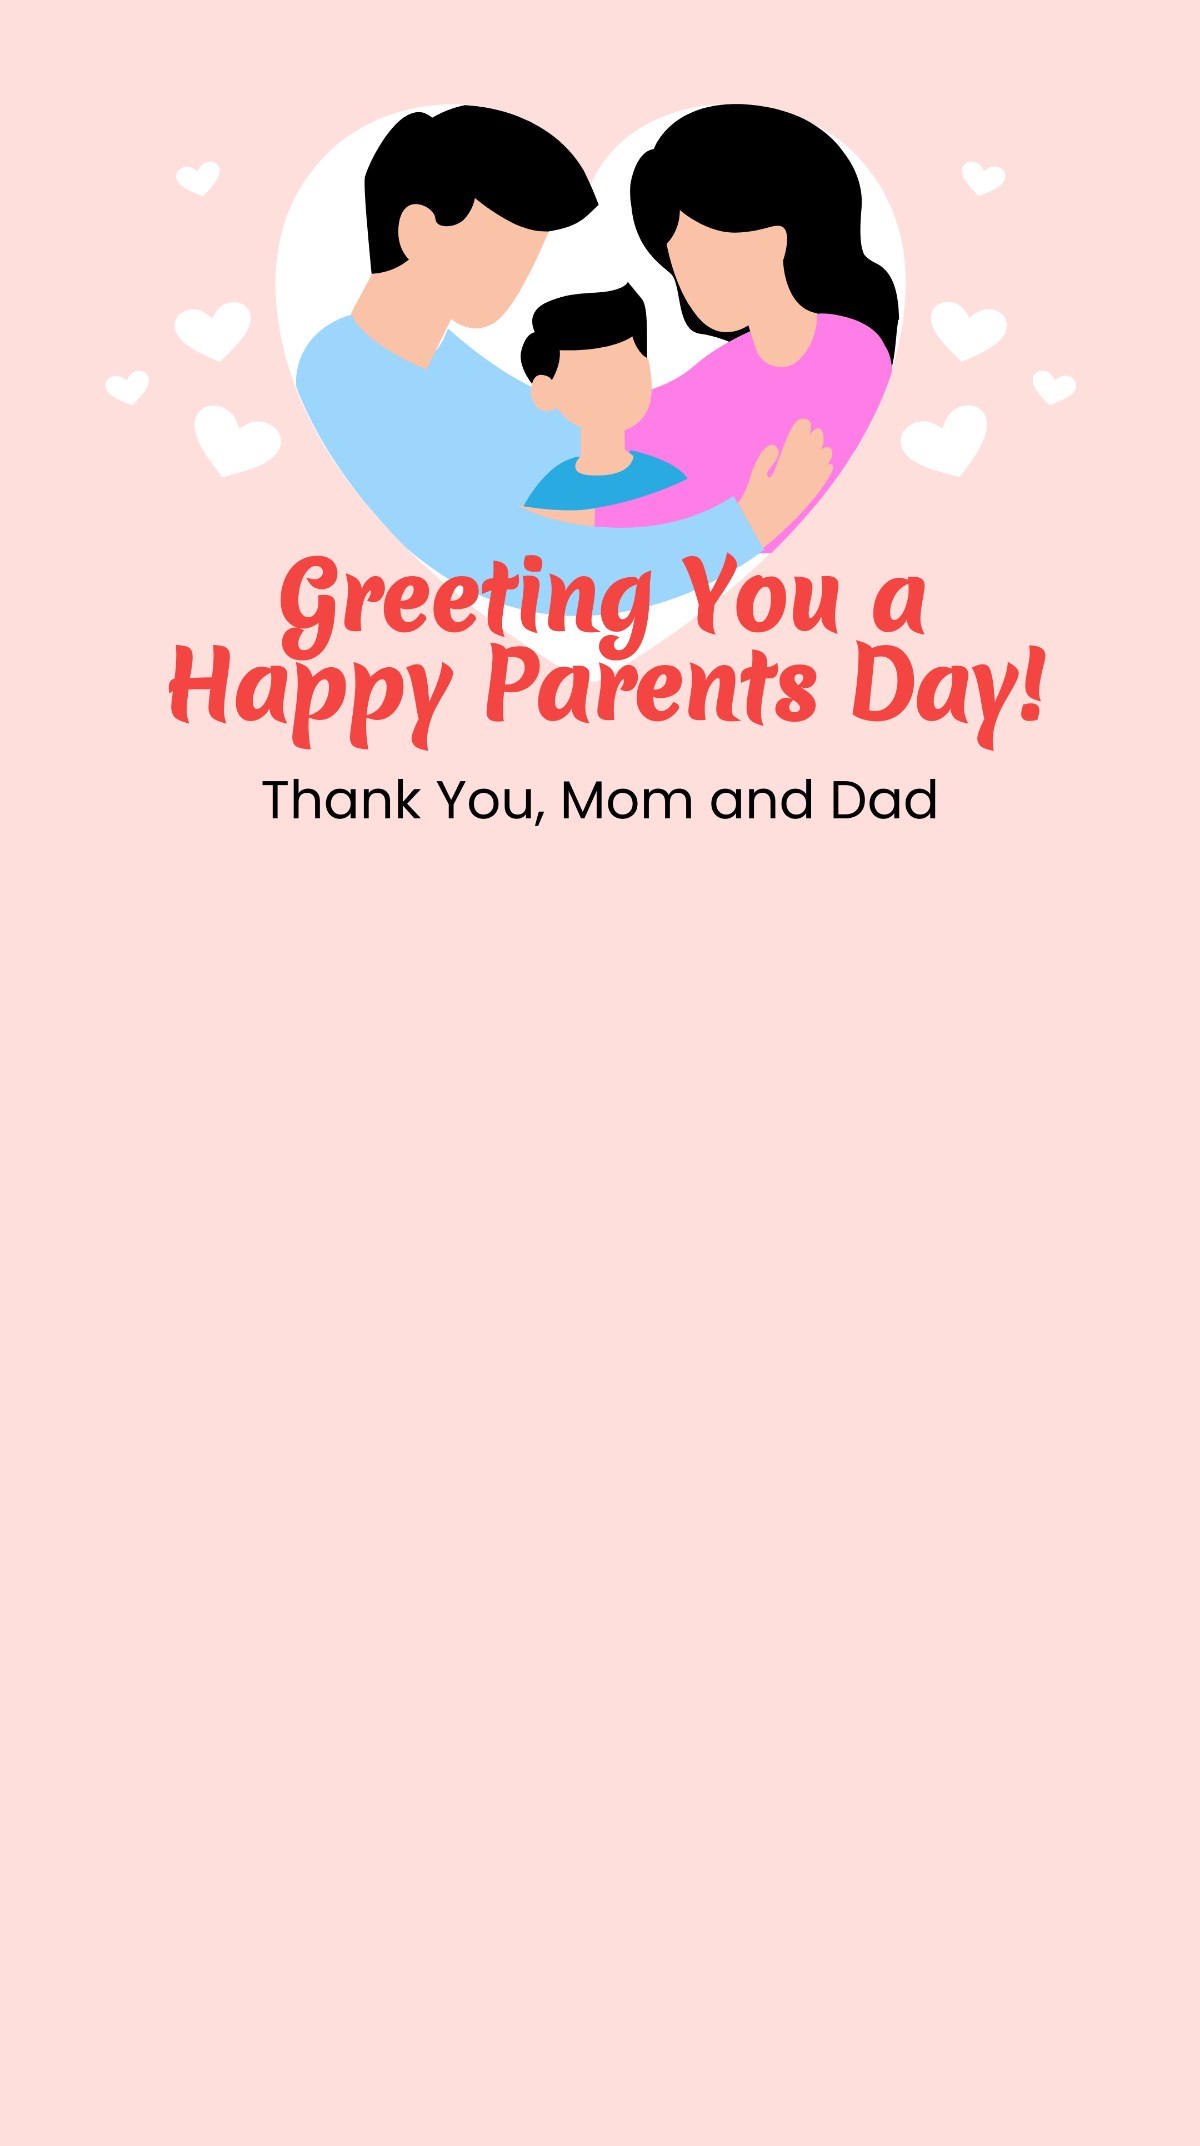 Happy Parents Day Snapchat Geofilter Template